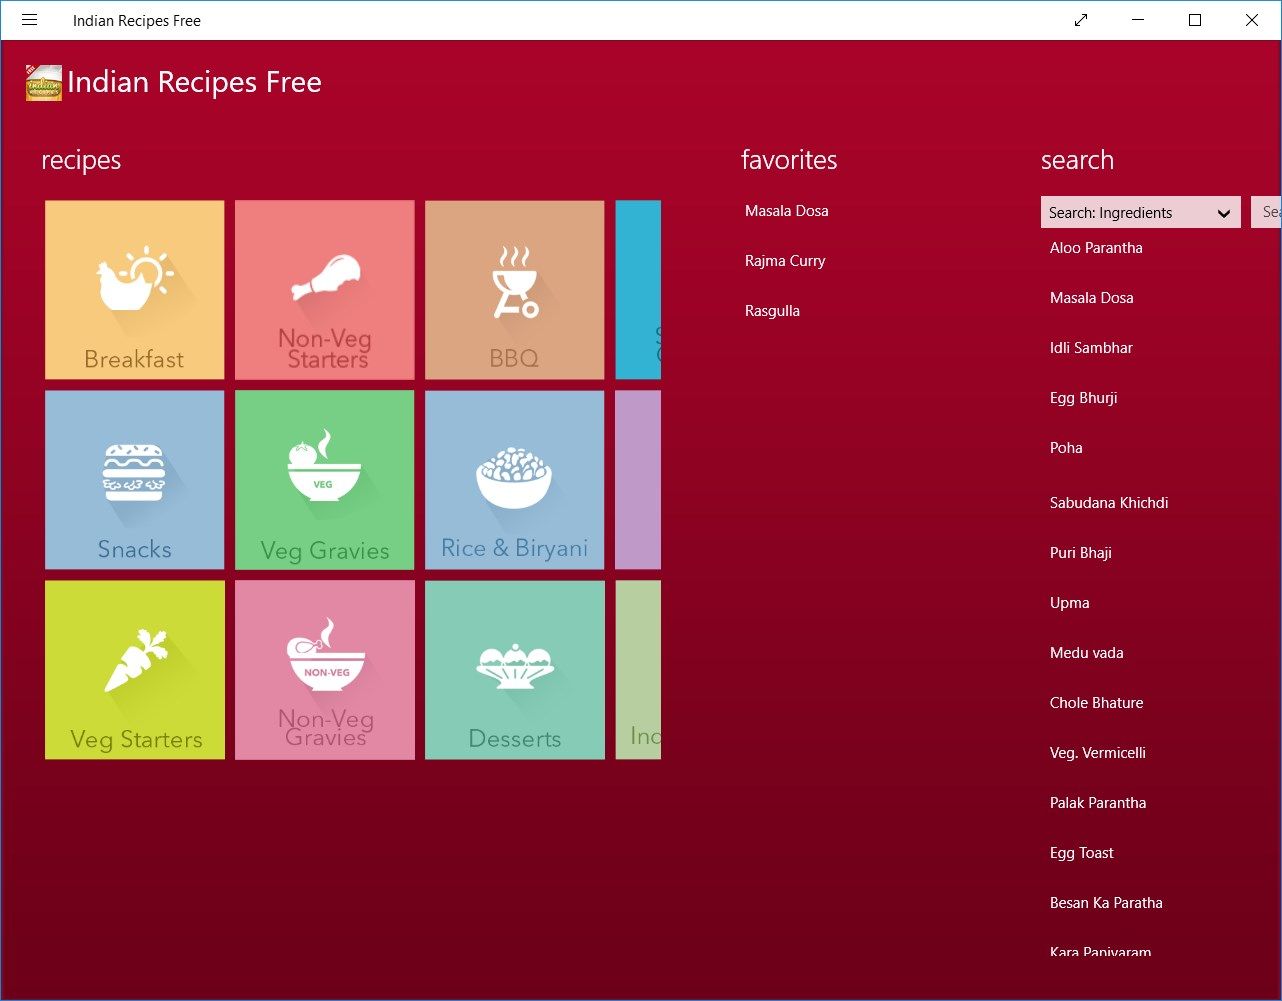 Over 12 categories to choose recipes from!